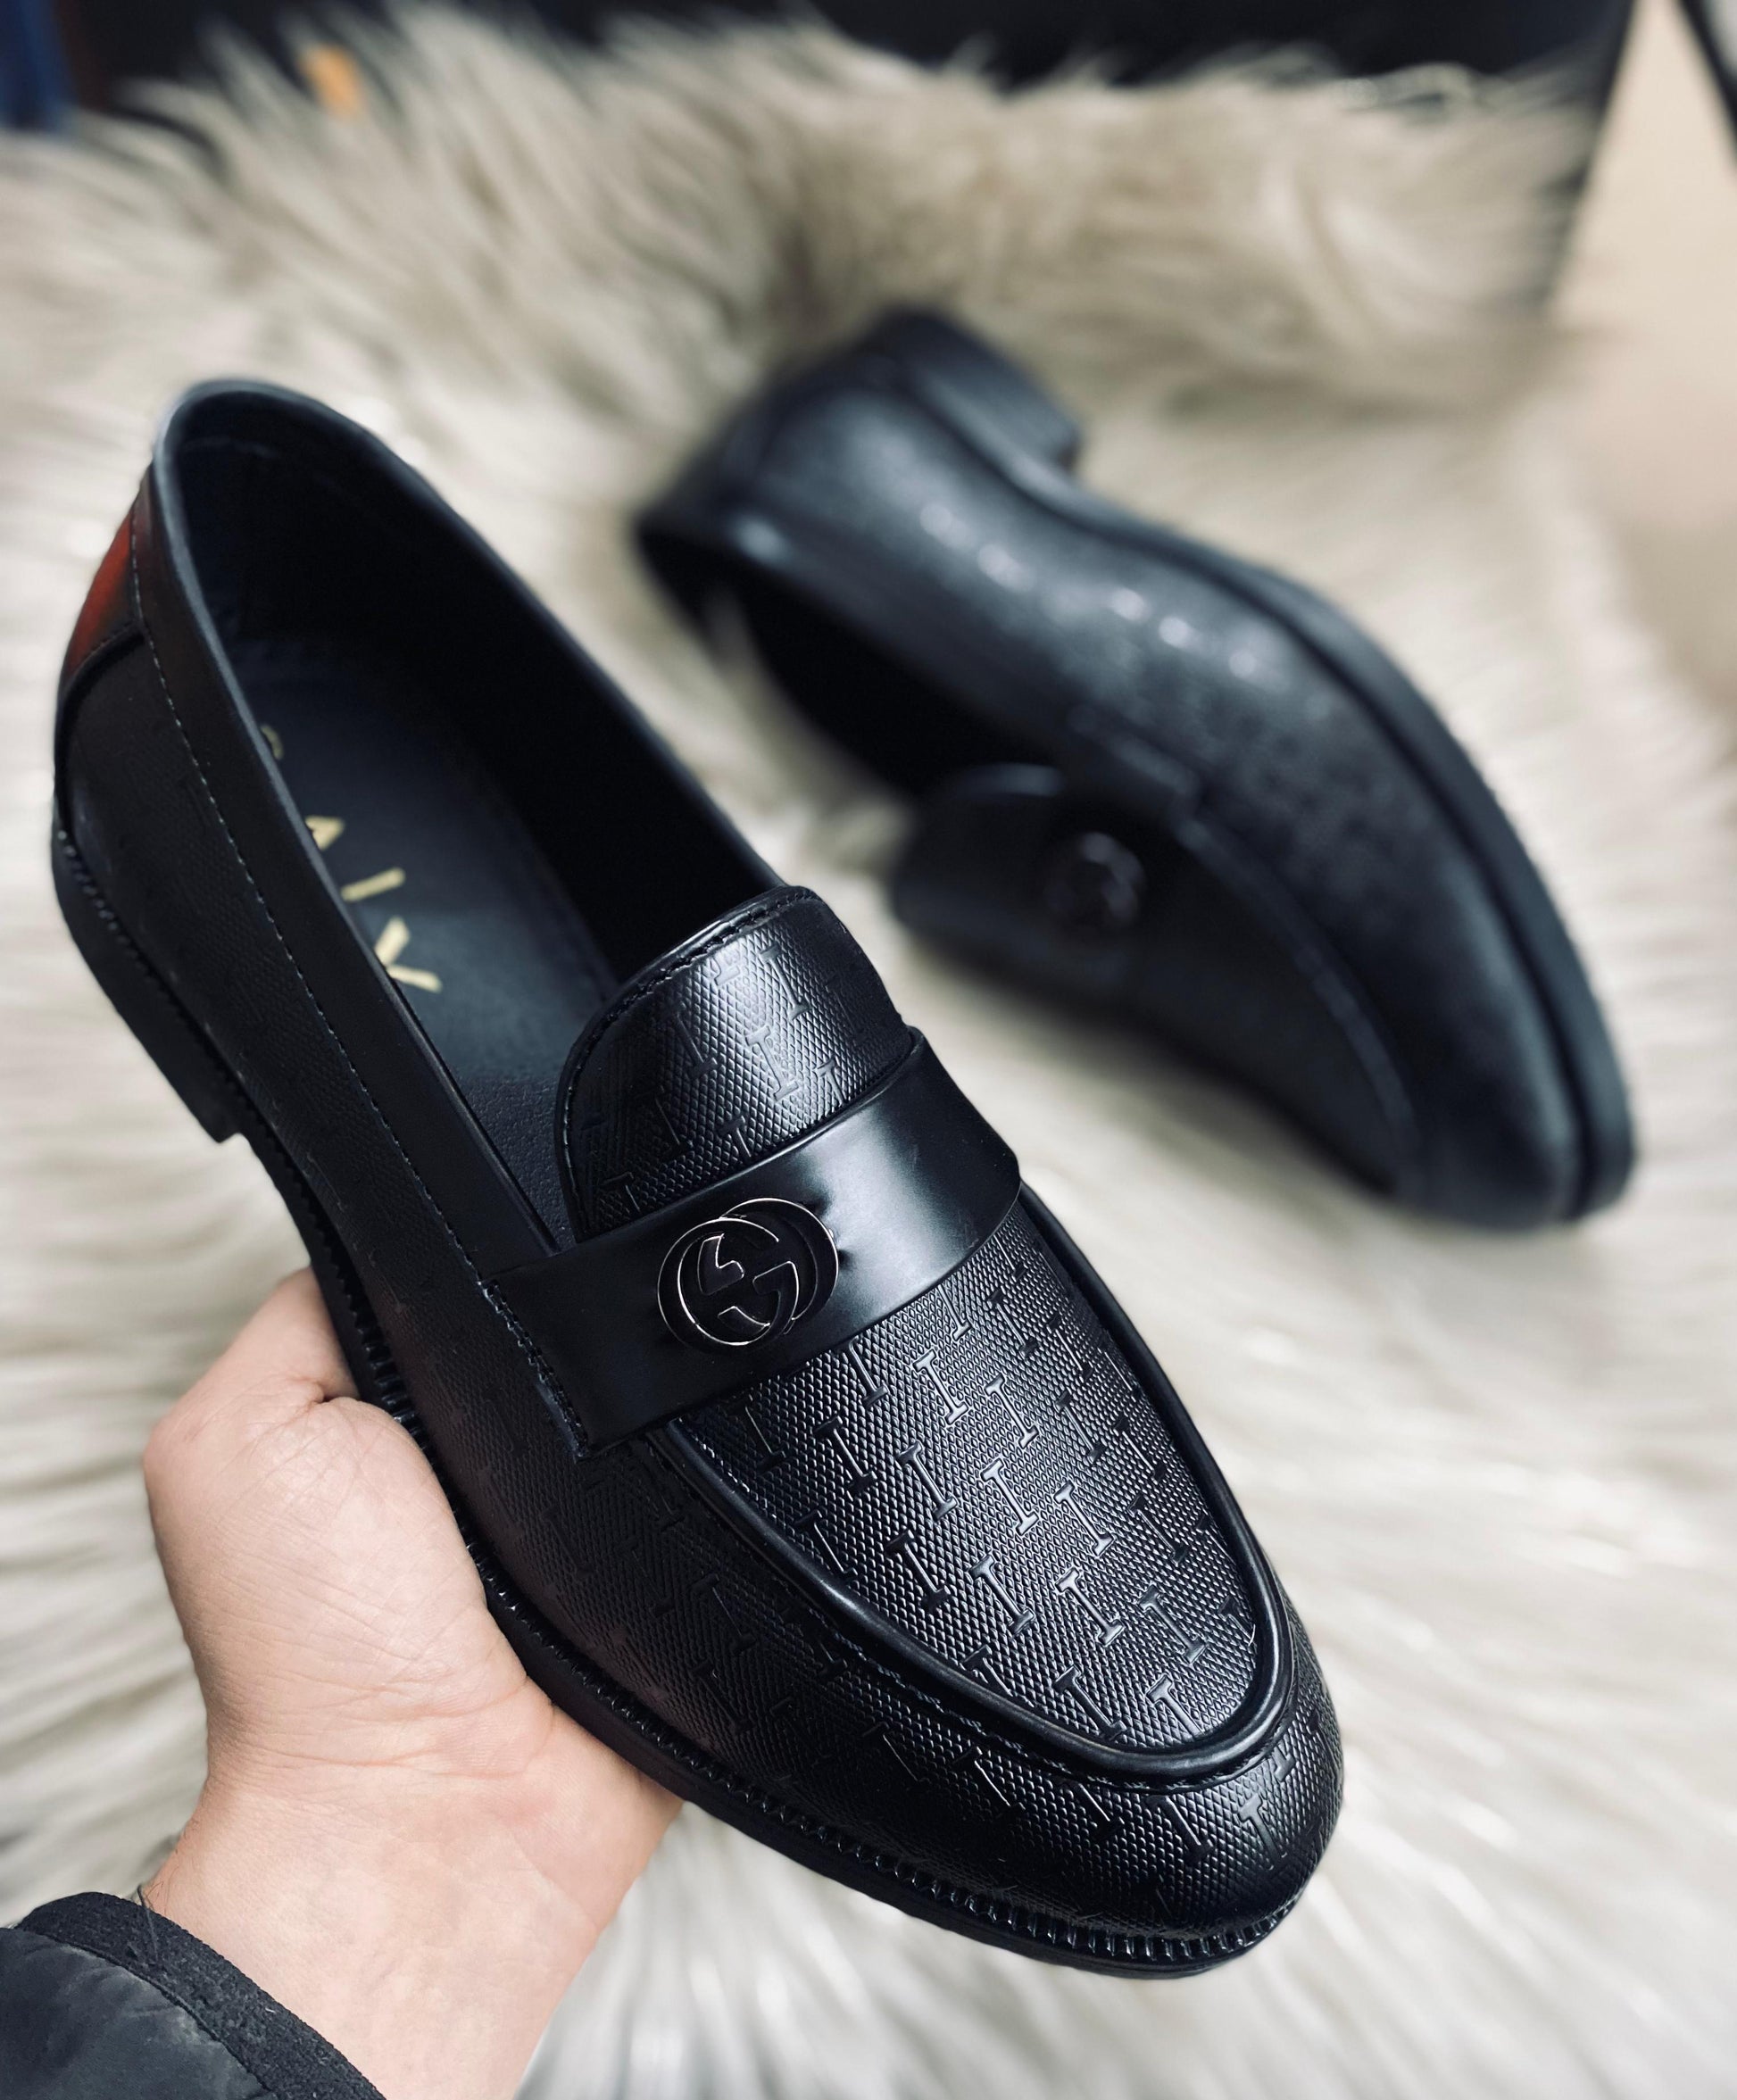 Gucci First Copy Shoe Very High Quality faux Leather 